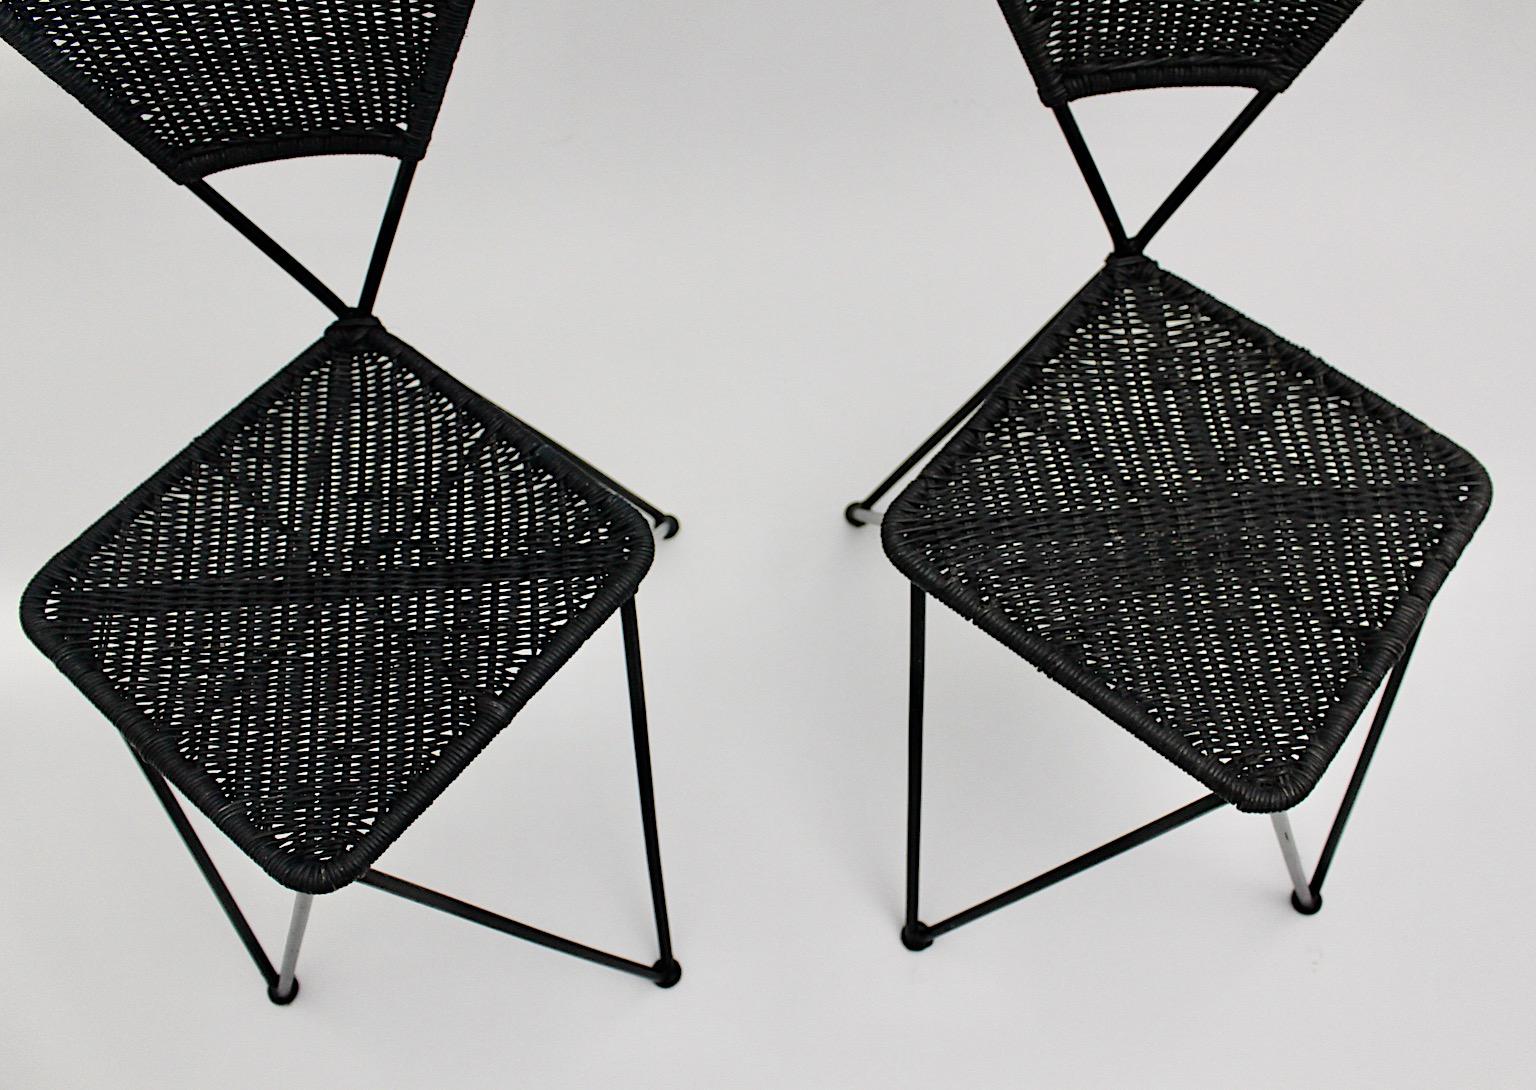 Mid-20th Century Wicker Metal Vintage Dining Chairs or Chairs Black Blue Sonett Vienna circa 1950 For Sale